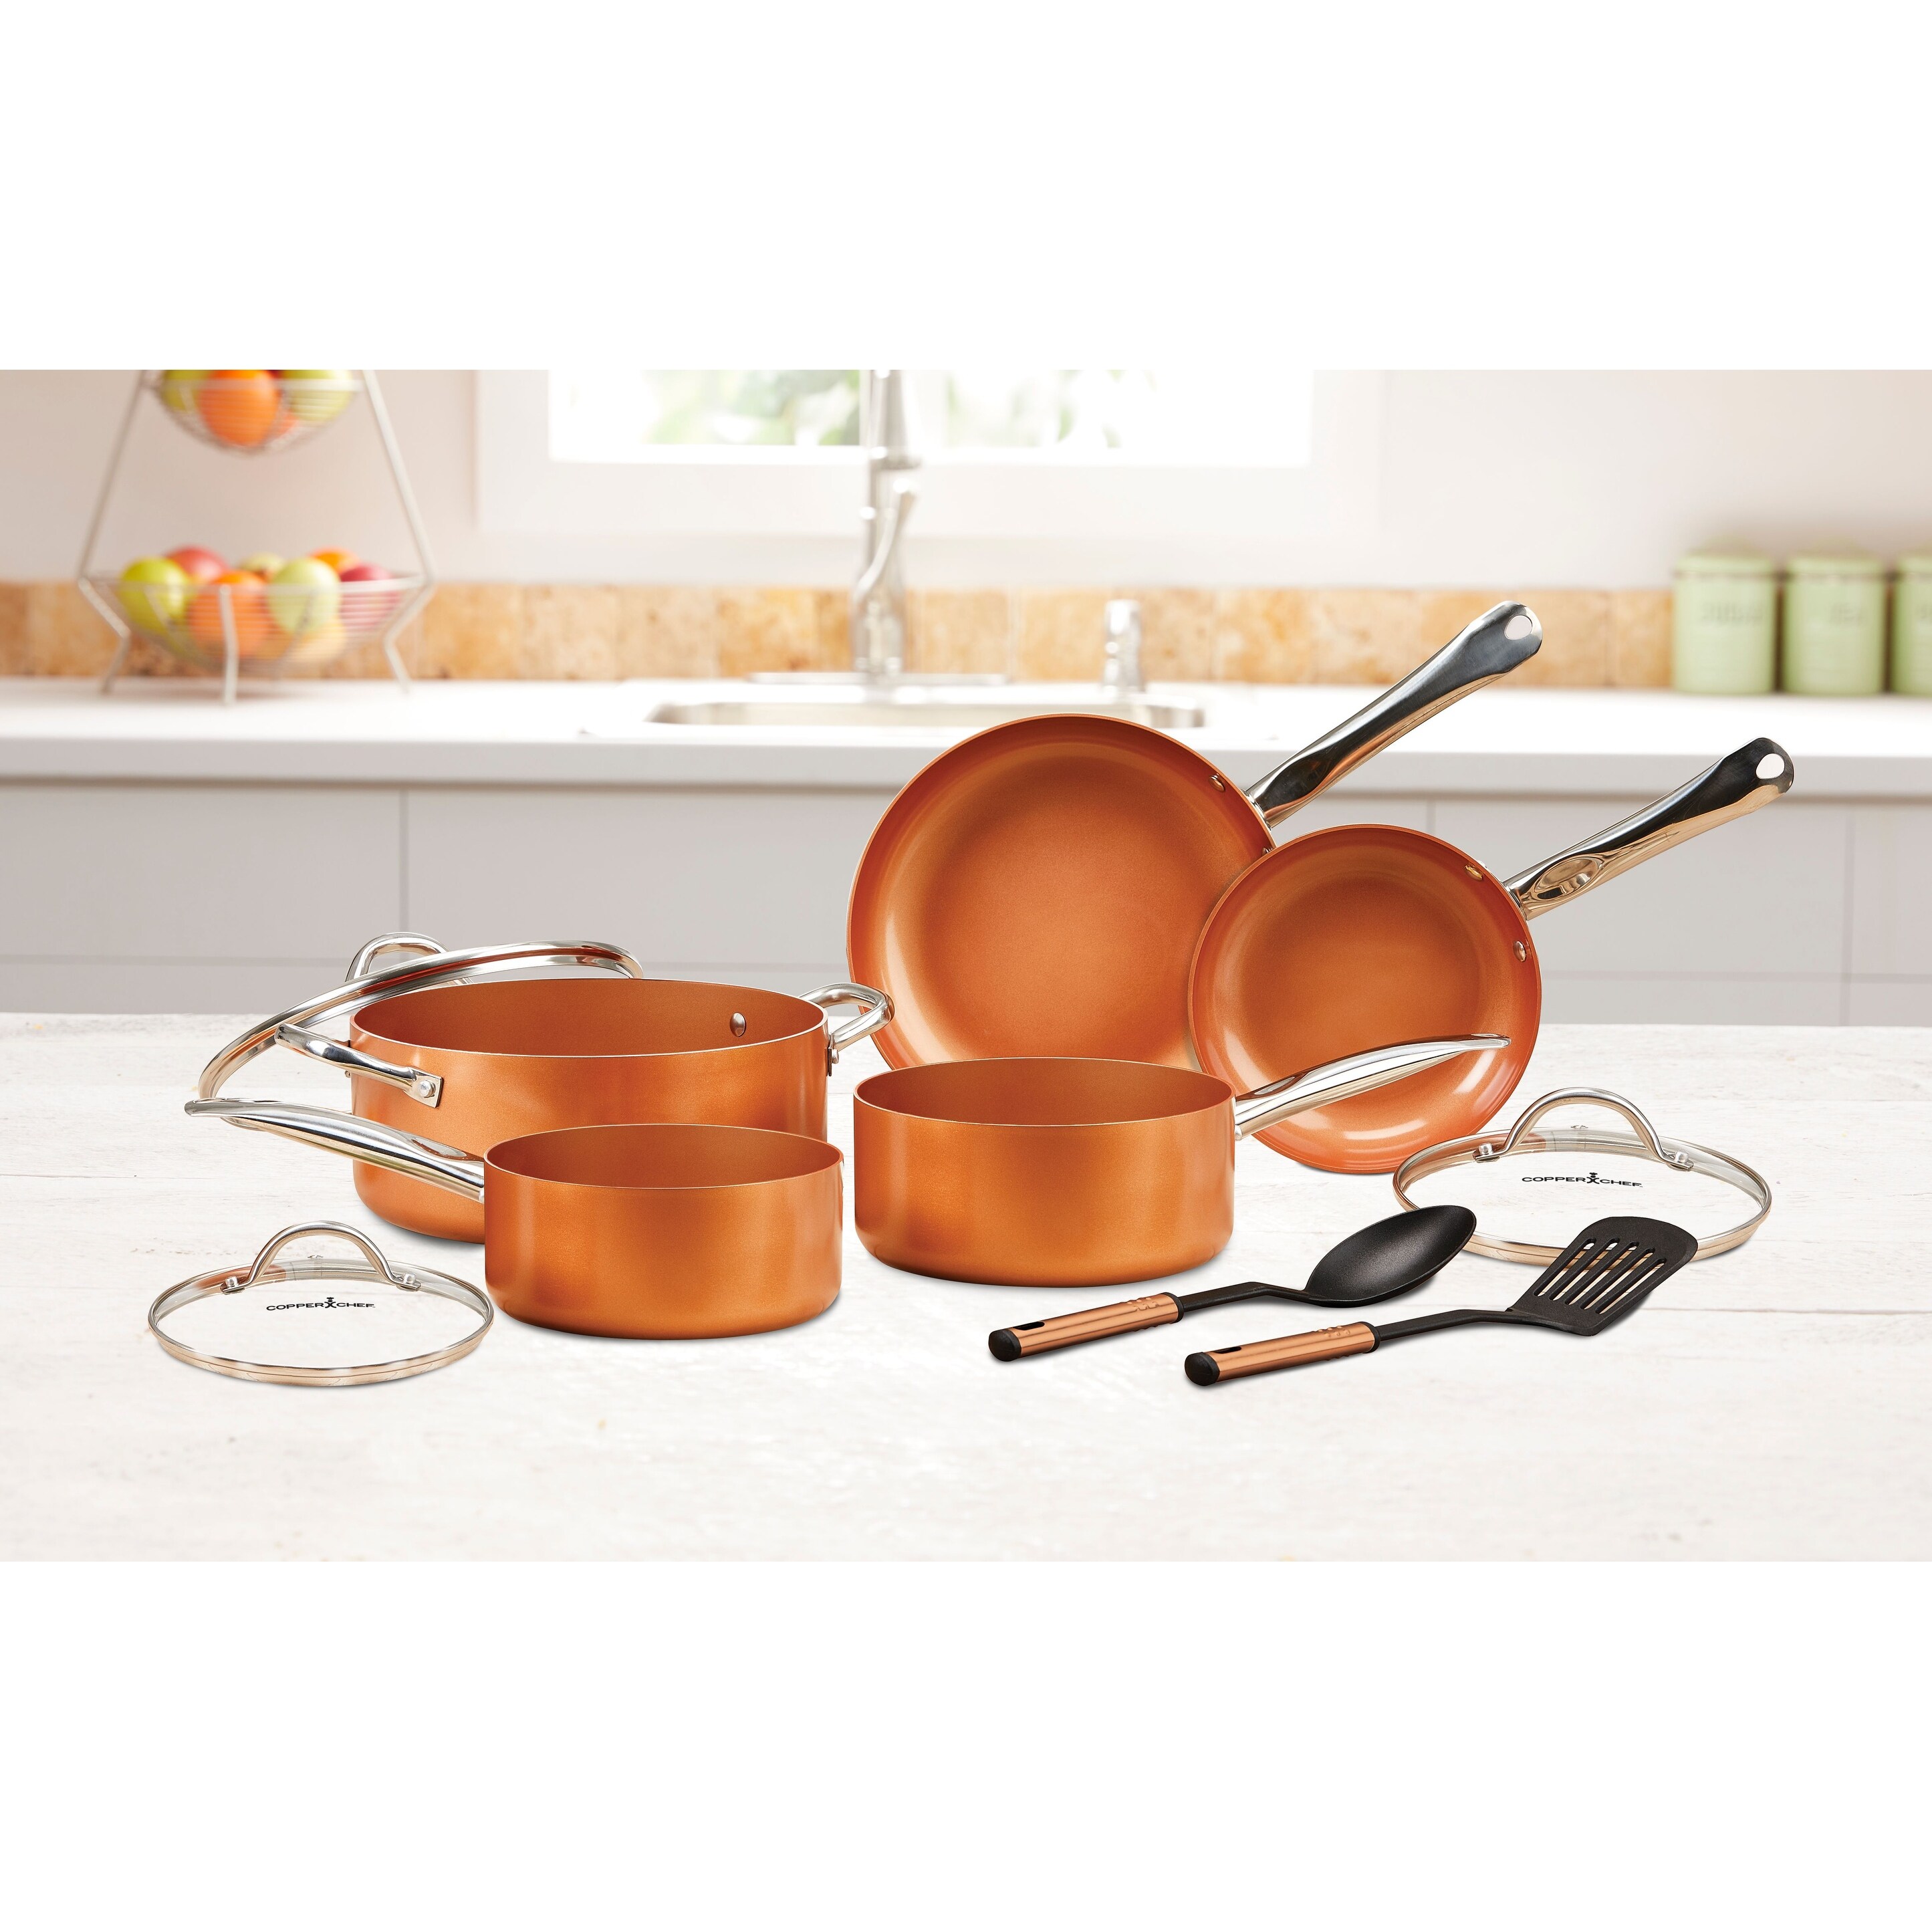 https://ak1.ostkcdn.com/images/products/is/images/direct/37aa02aea03782bffd3e083f0f3d349367e21cdb/10-Piece-Nonstick-Pan-Set%2C-with-CeramiTech.jpg